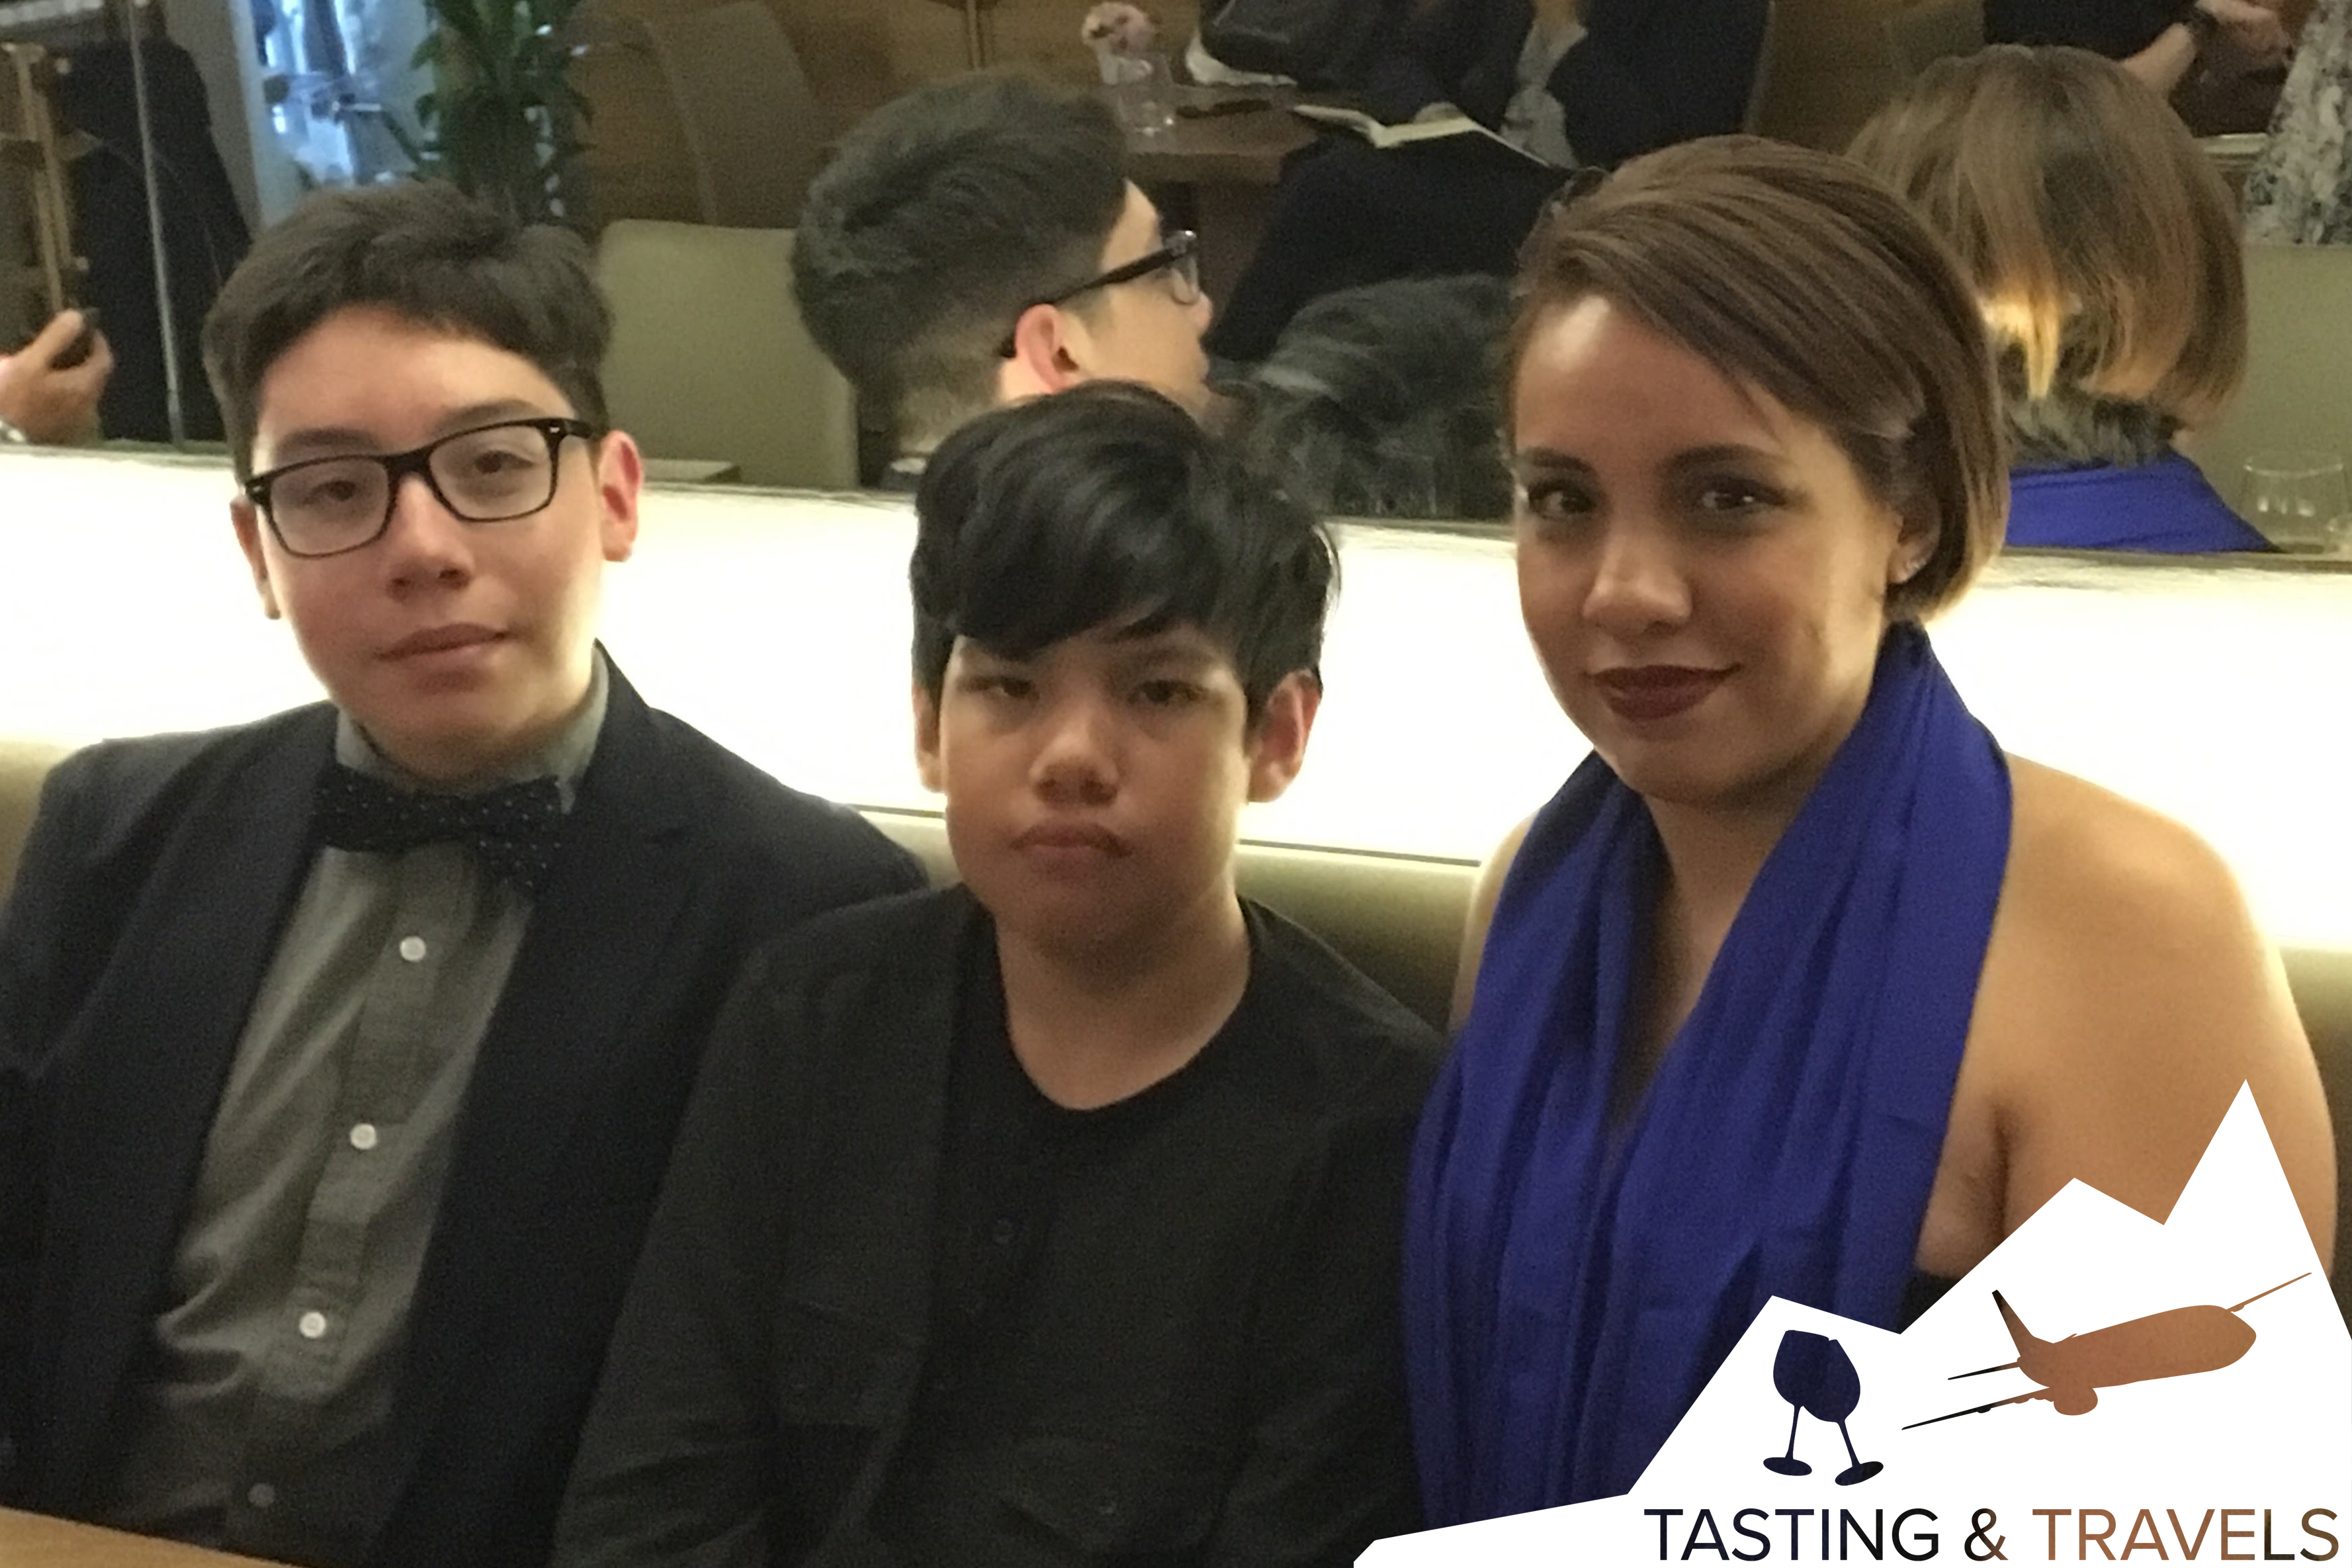 Three Mexican citizens seated in a room tasting wine